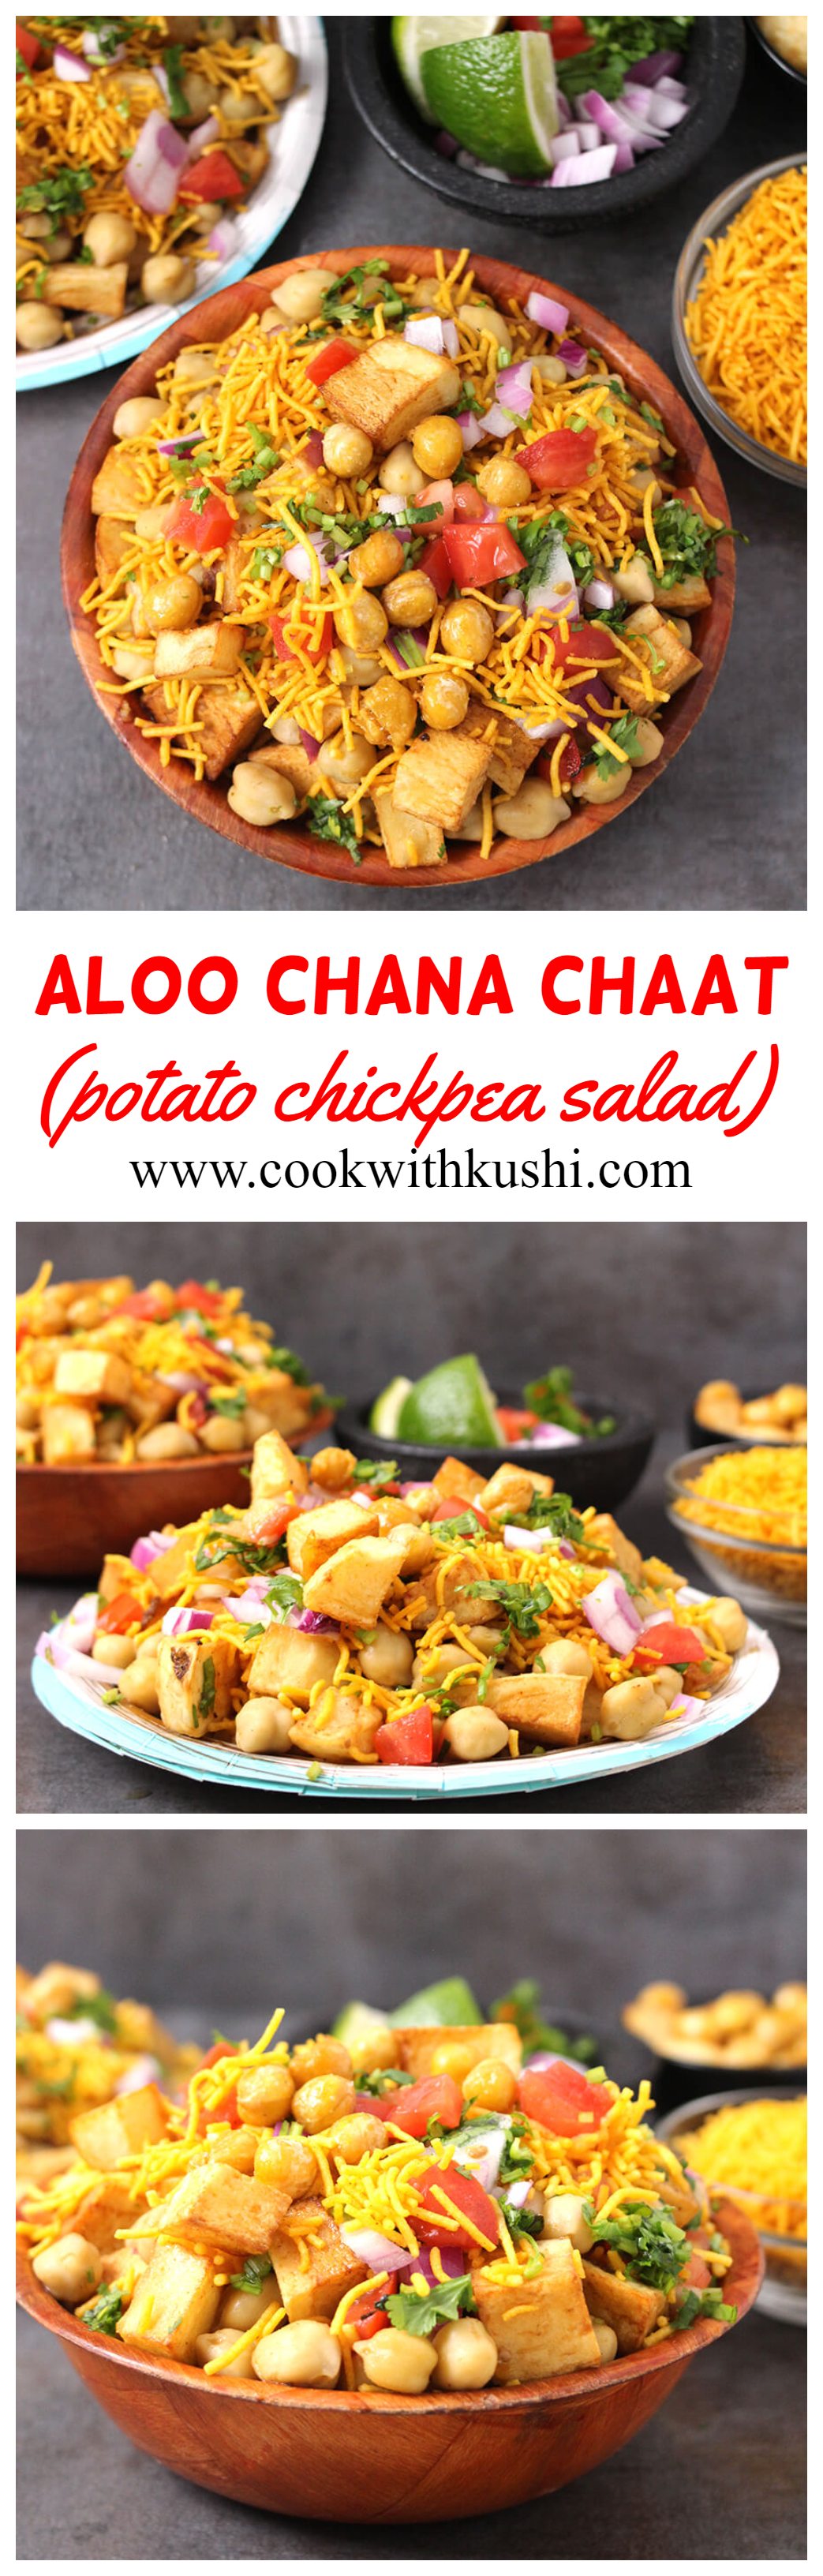 Aloo Chana Chaat  or Potato Chickpea Salad is a sweet, spicy and tangy – all in one recipe that can be served as a starter or even had as an evening snack. #chole #chaat #chickpeasalad #aloorecipes #potatorecipes #summerrecipes #indianstreetfood #appetizers